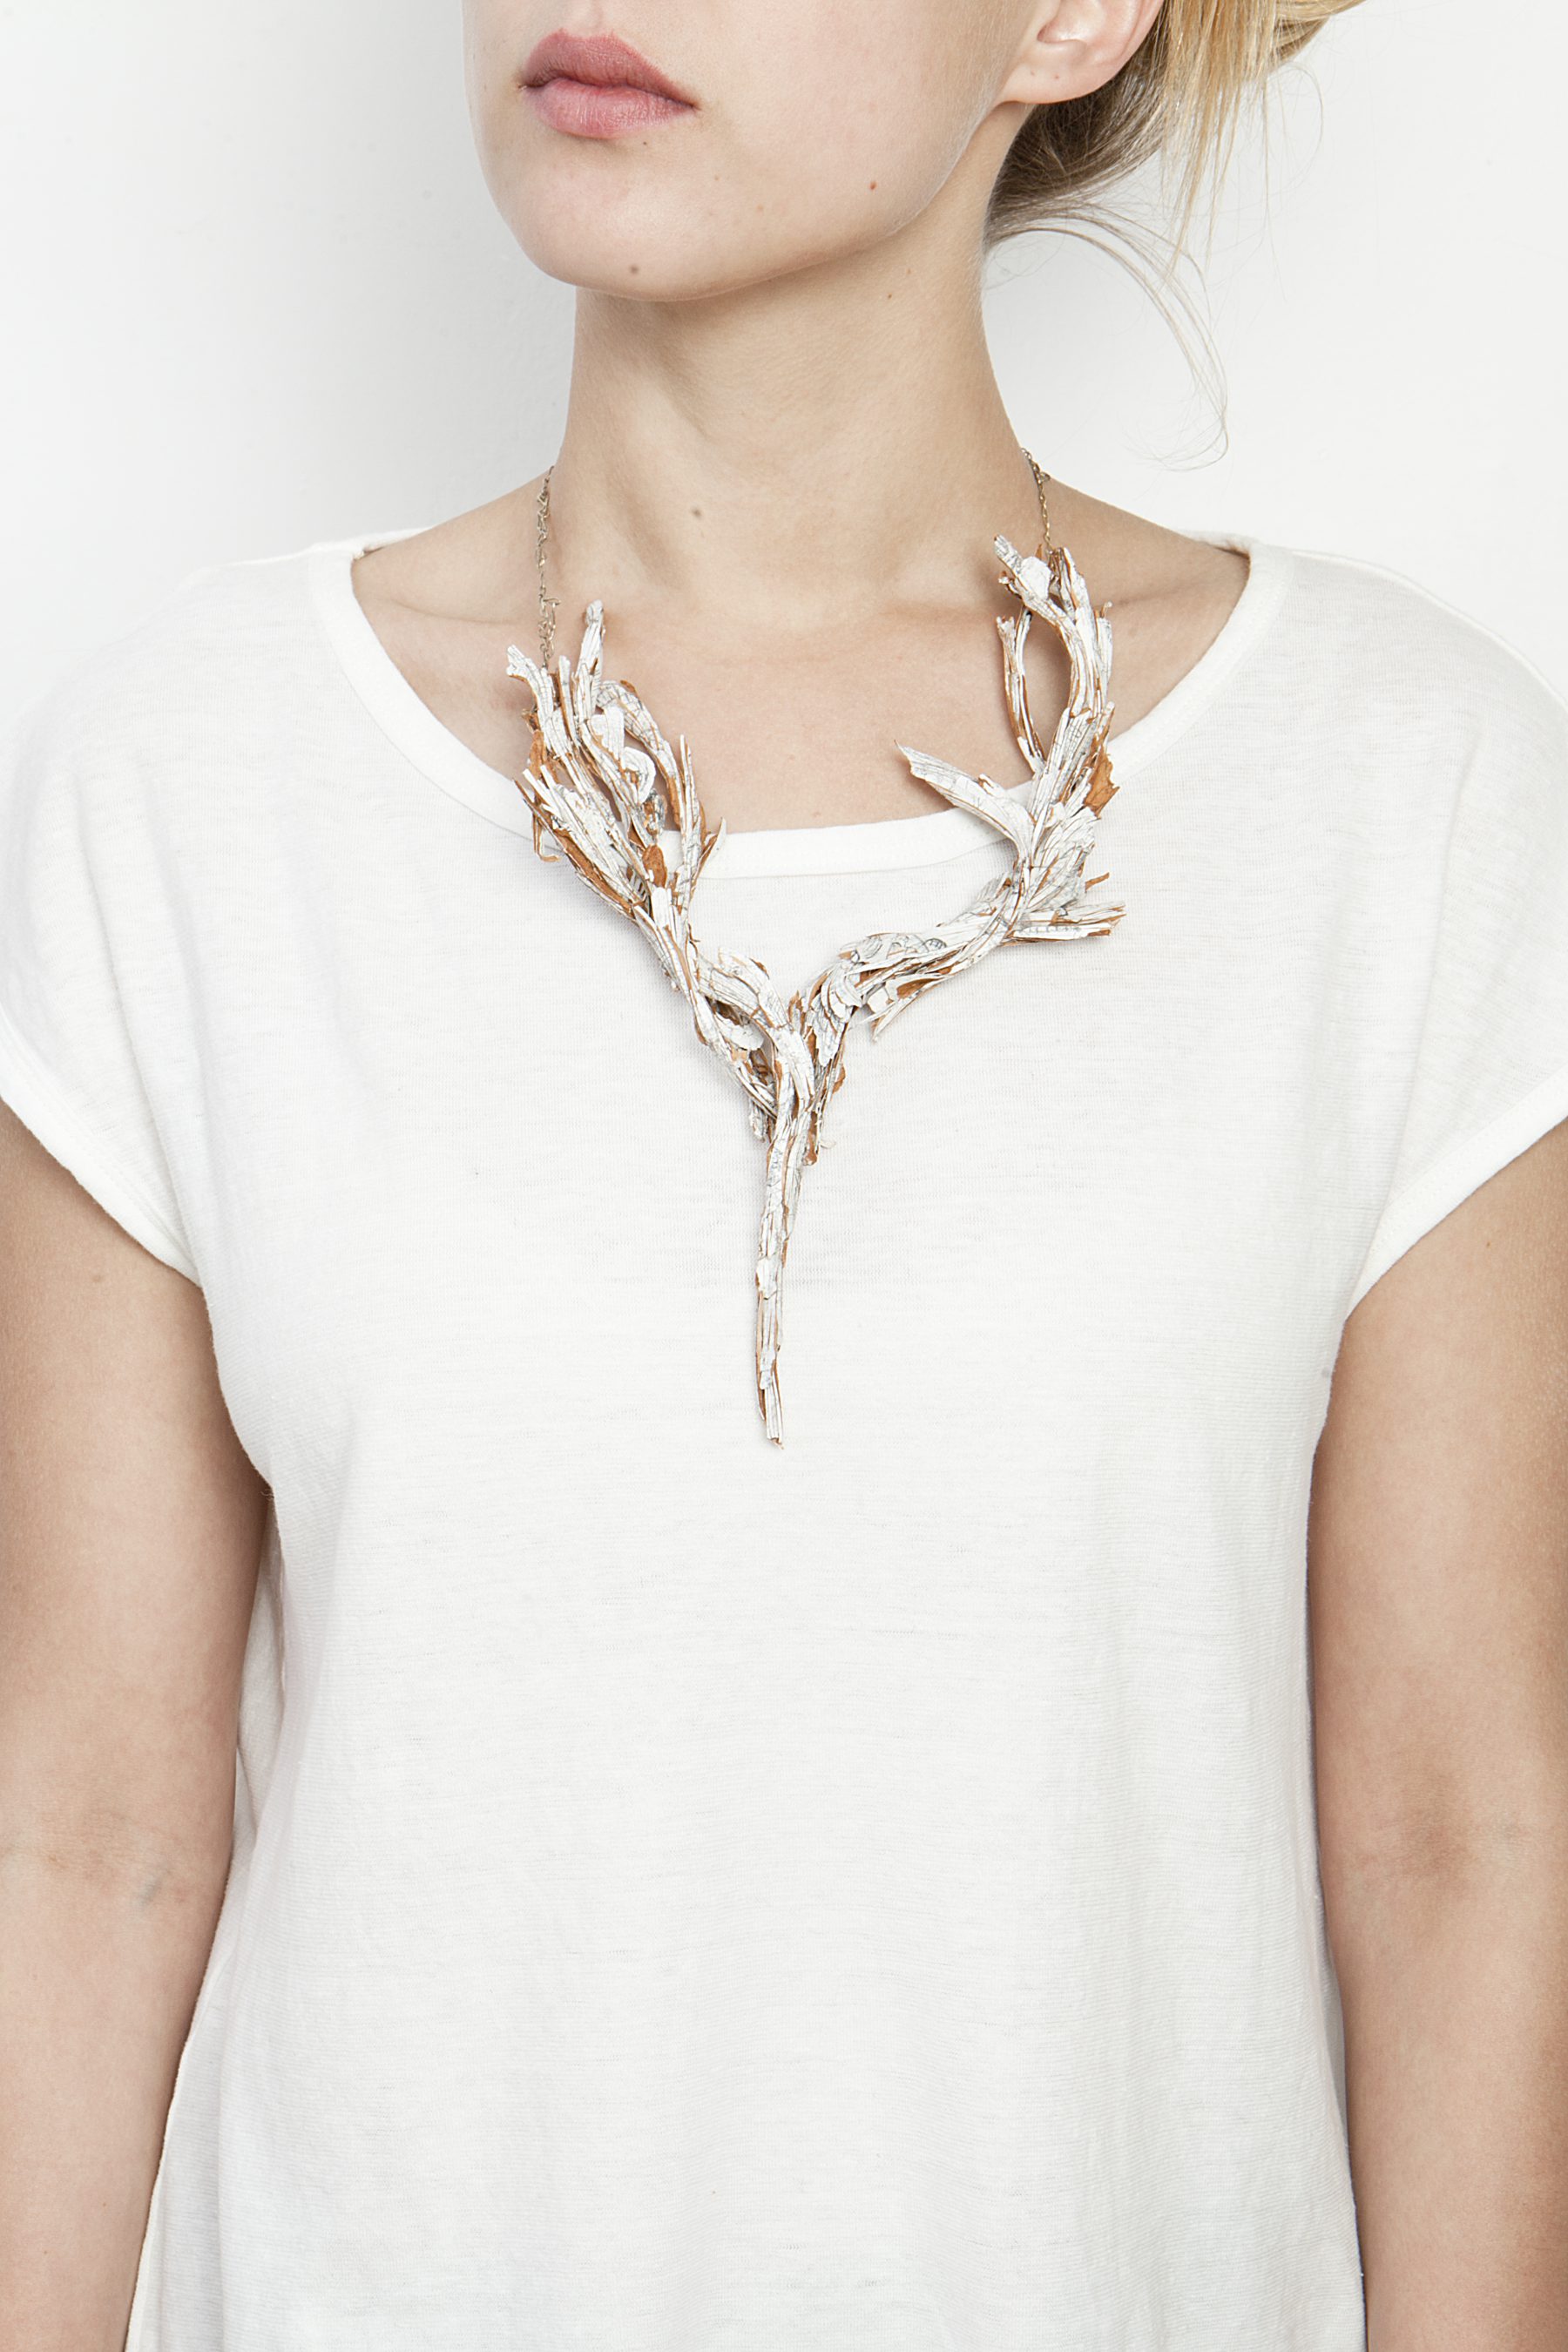 Untitled   |  Necklace    |  2013   |   Treated cellulose, graphite, paint, glue, silver, gold  |   290X170X20 mm